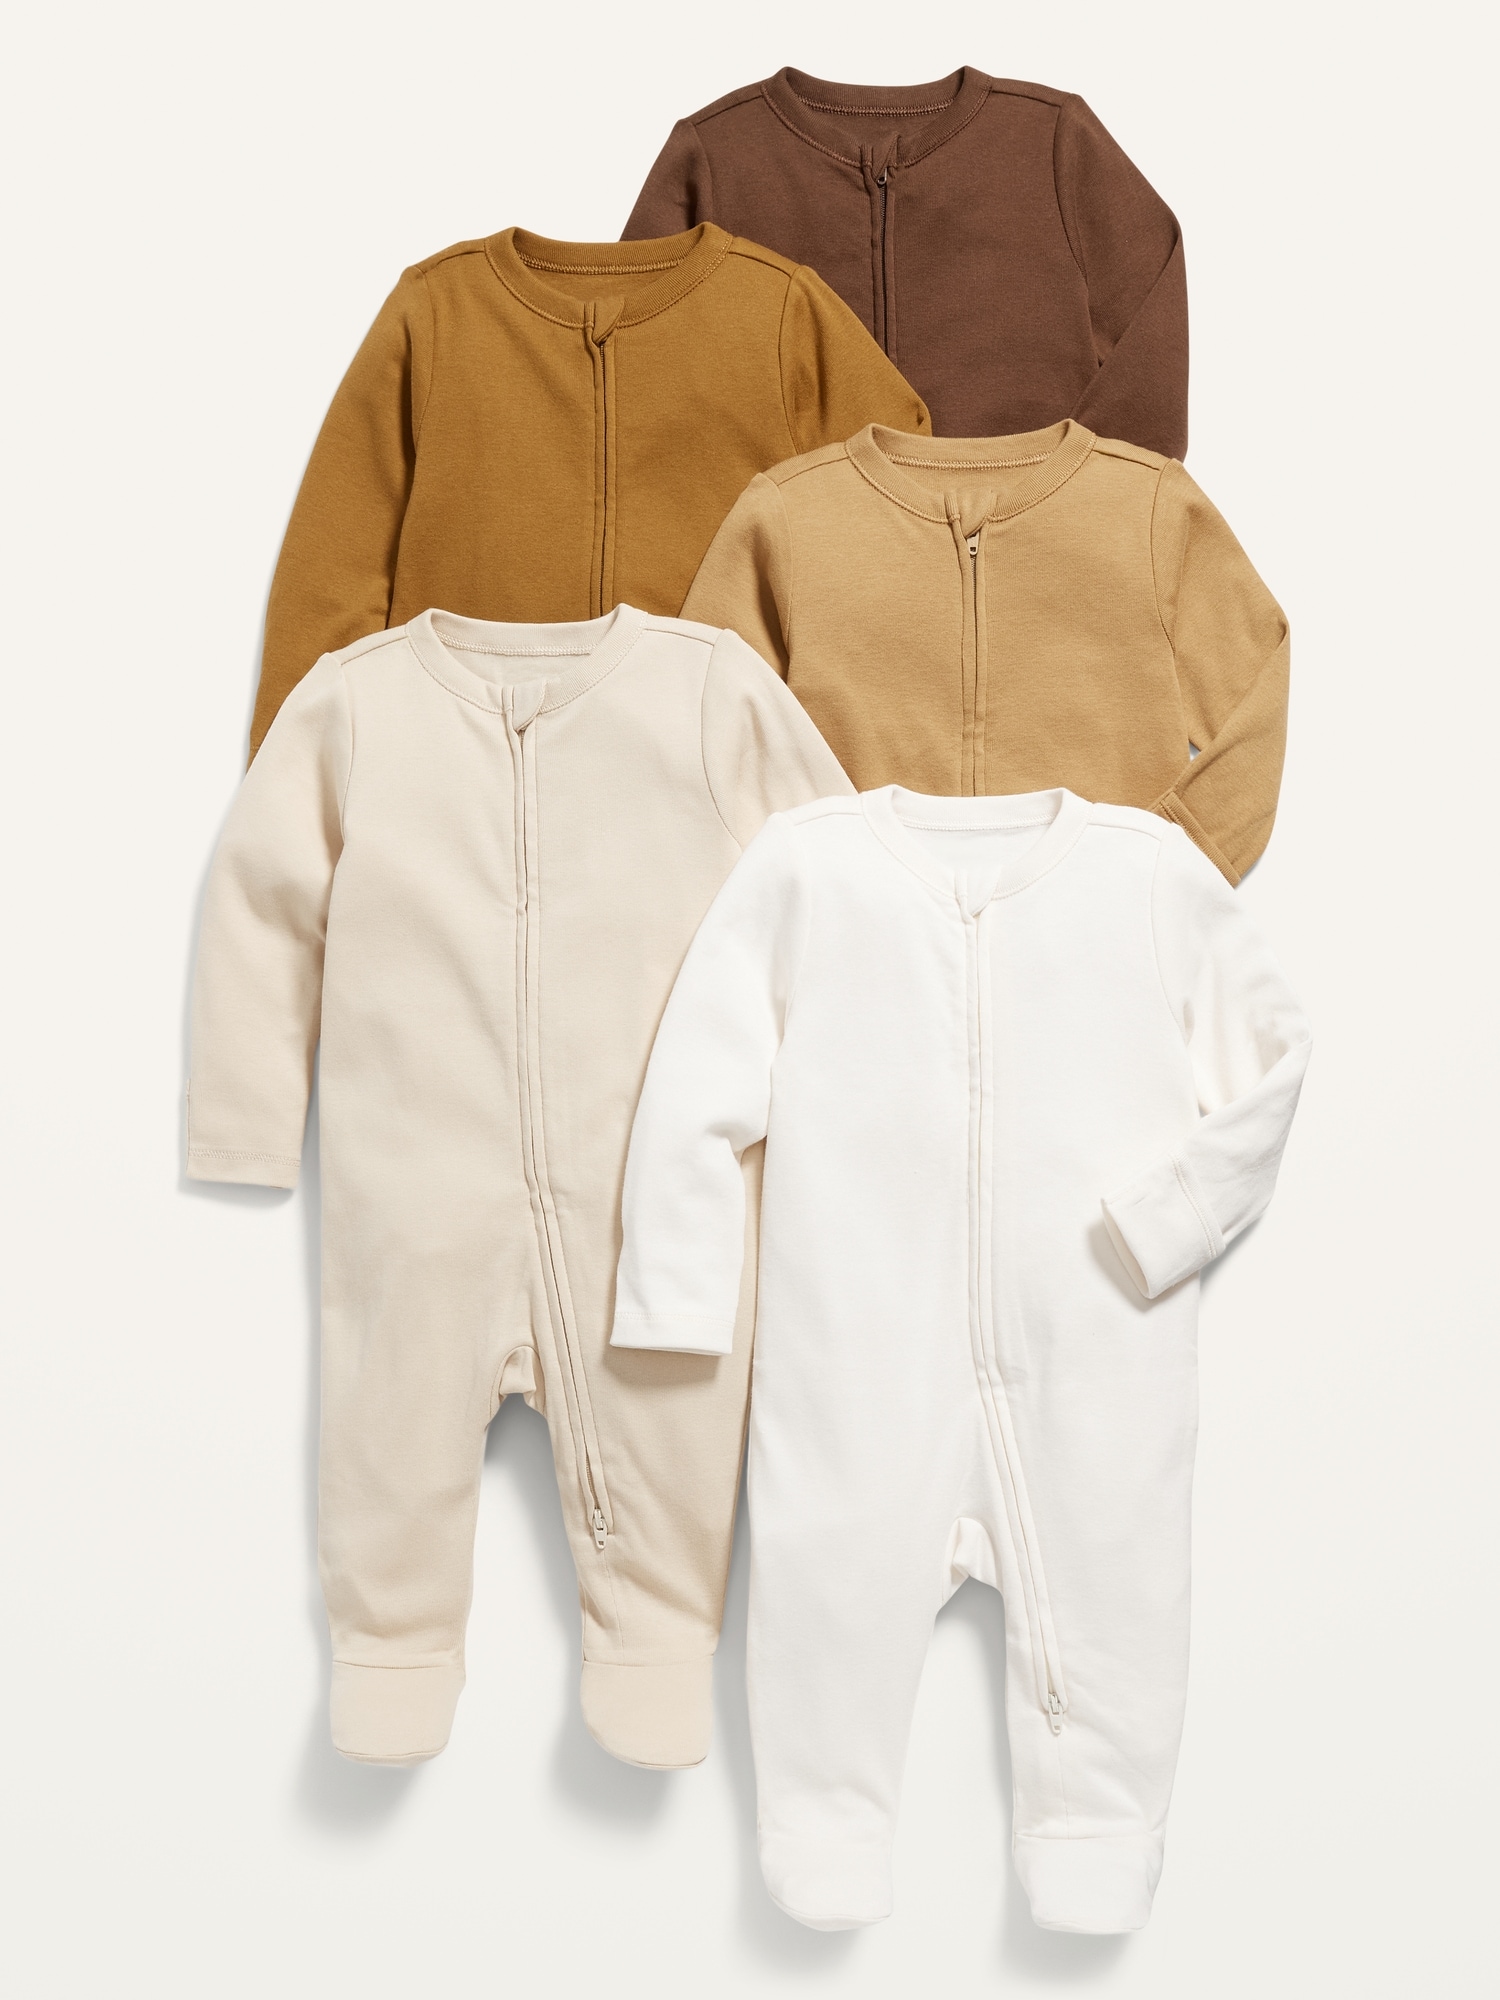 Oldnavy Unisex 2-Way-Zip Sleep & Play Footed One-Piece 5-Pack for Baby Hot Deal